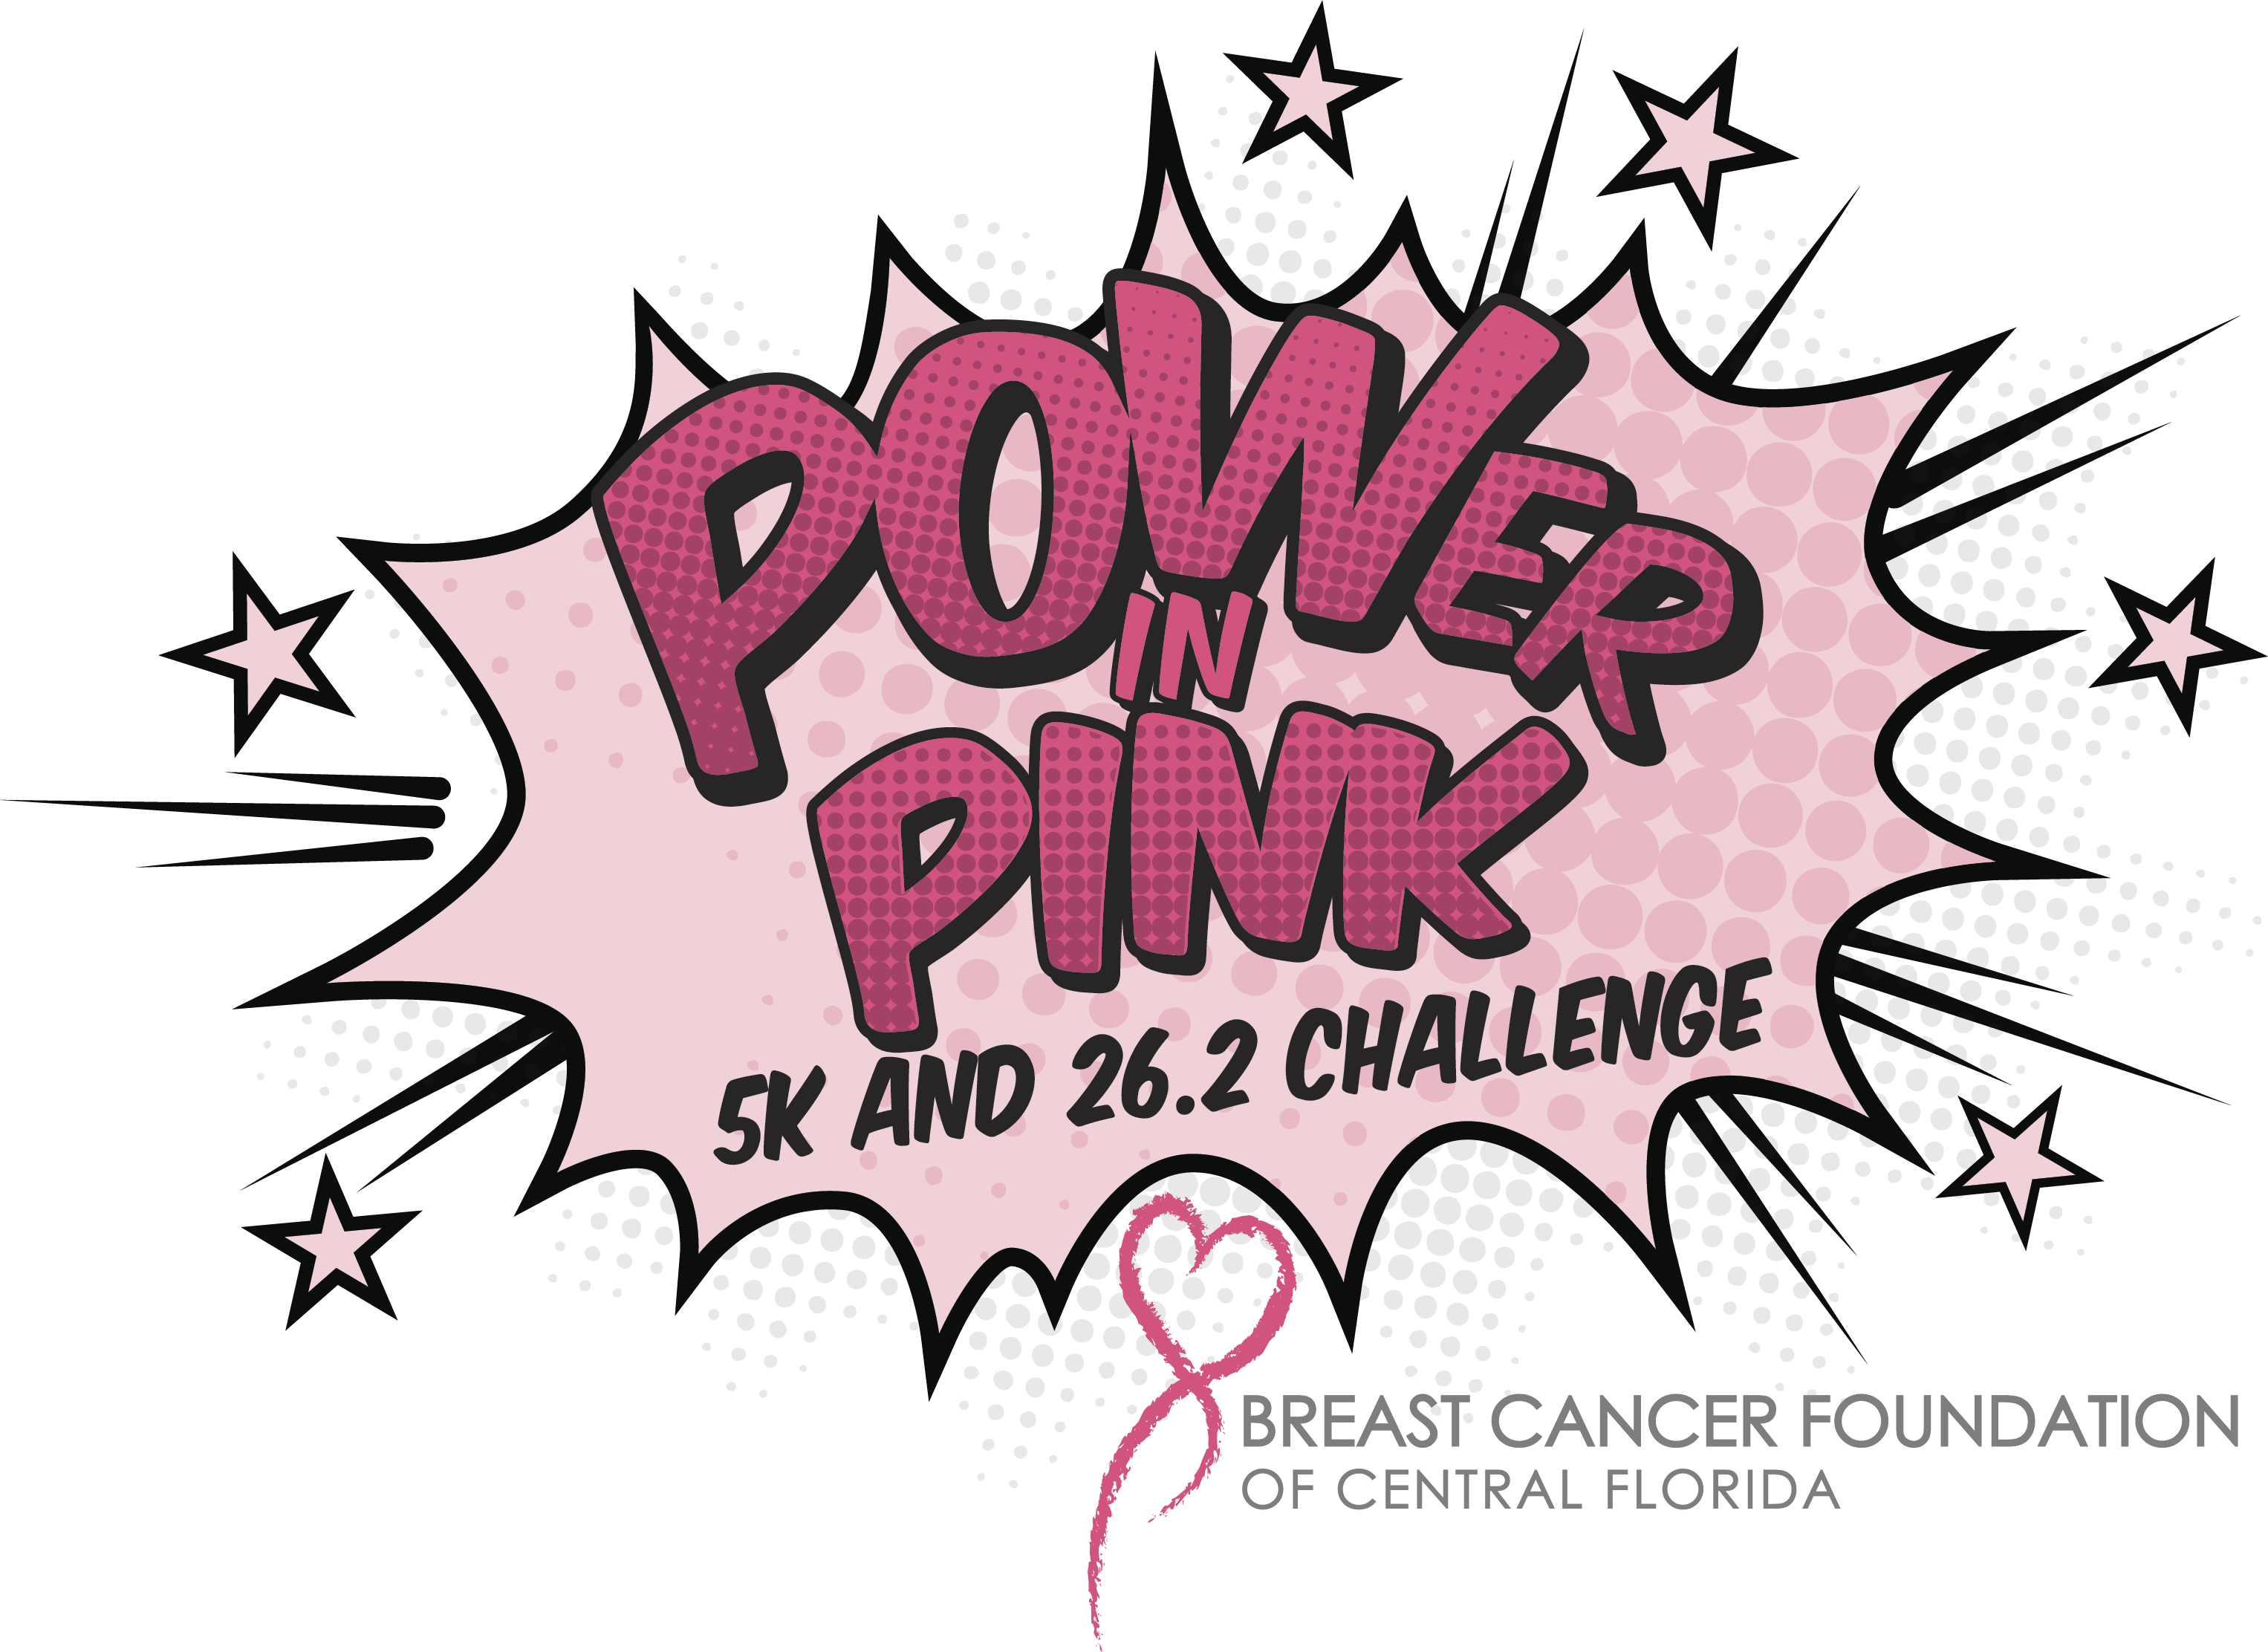 power in pink 5k and 26.2 challenge. breast cancer foundation of central florida